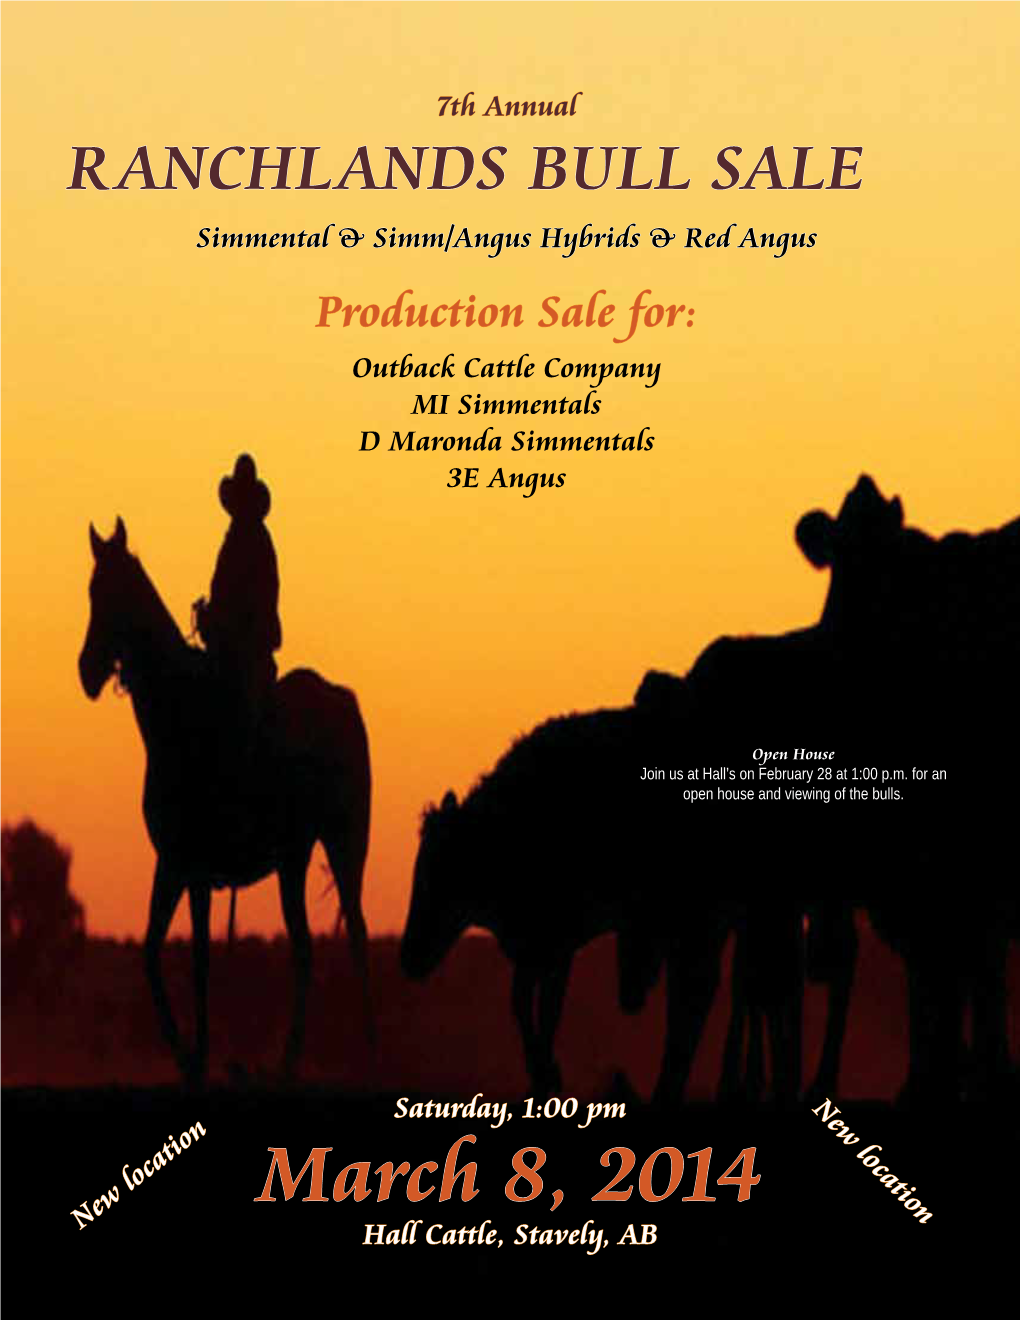 RANCHLANDS BULL SALE Simmental & Simm/Angus Hybrids & Red Angus Production Sale For: Outback Cattle Company MI Simmentals D Maronda Simmentals 3E Angus